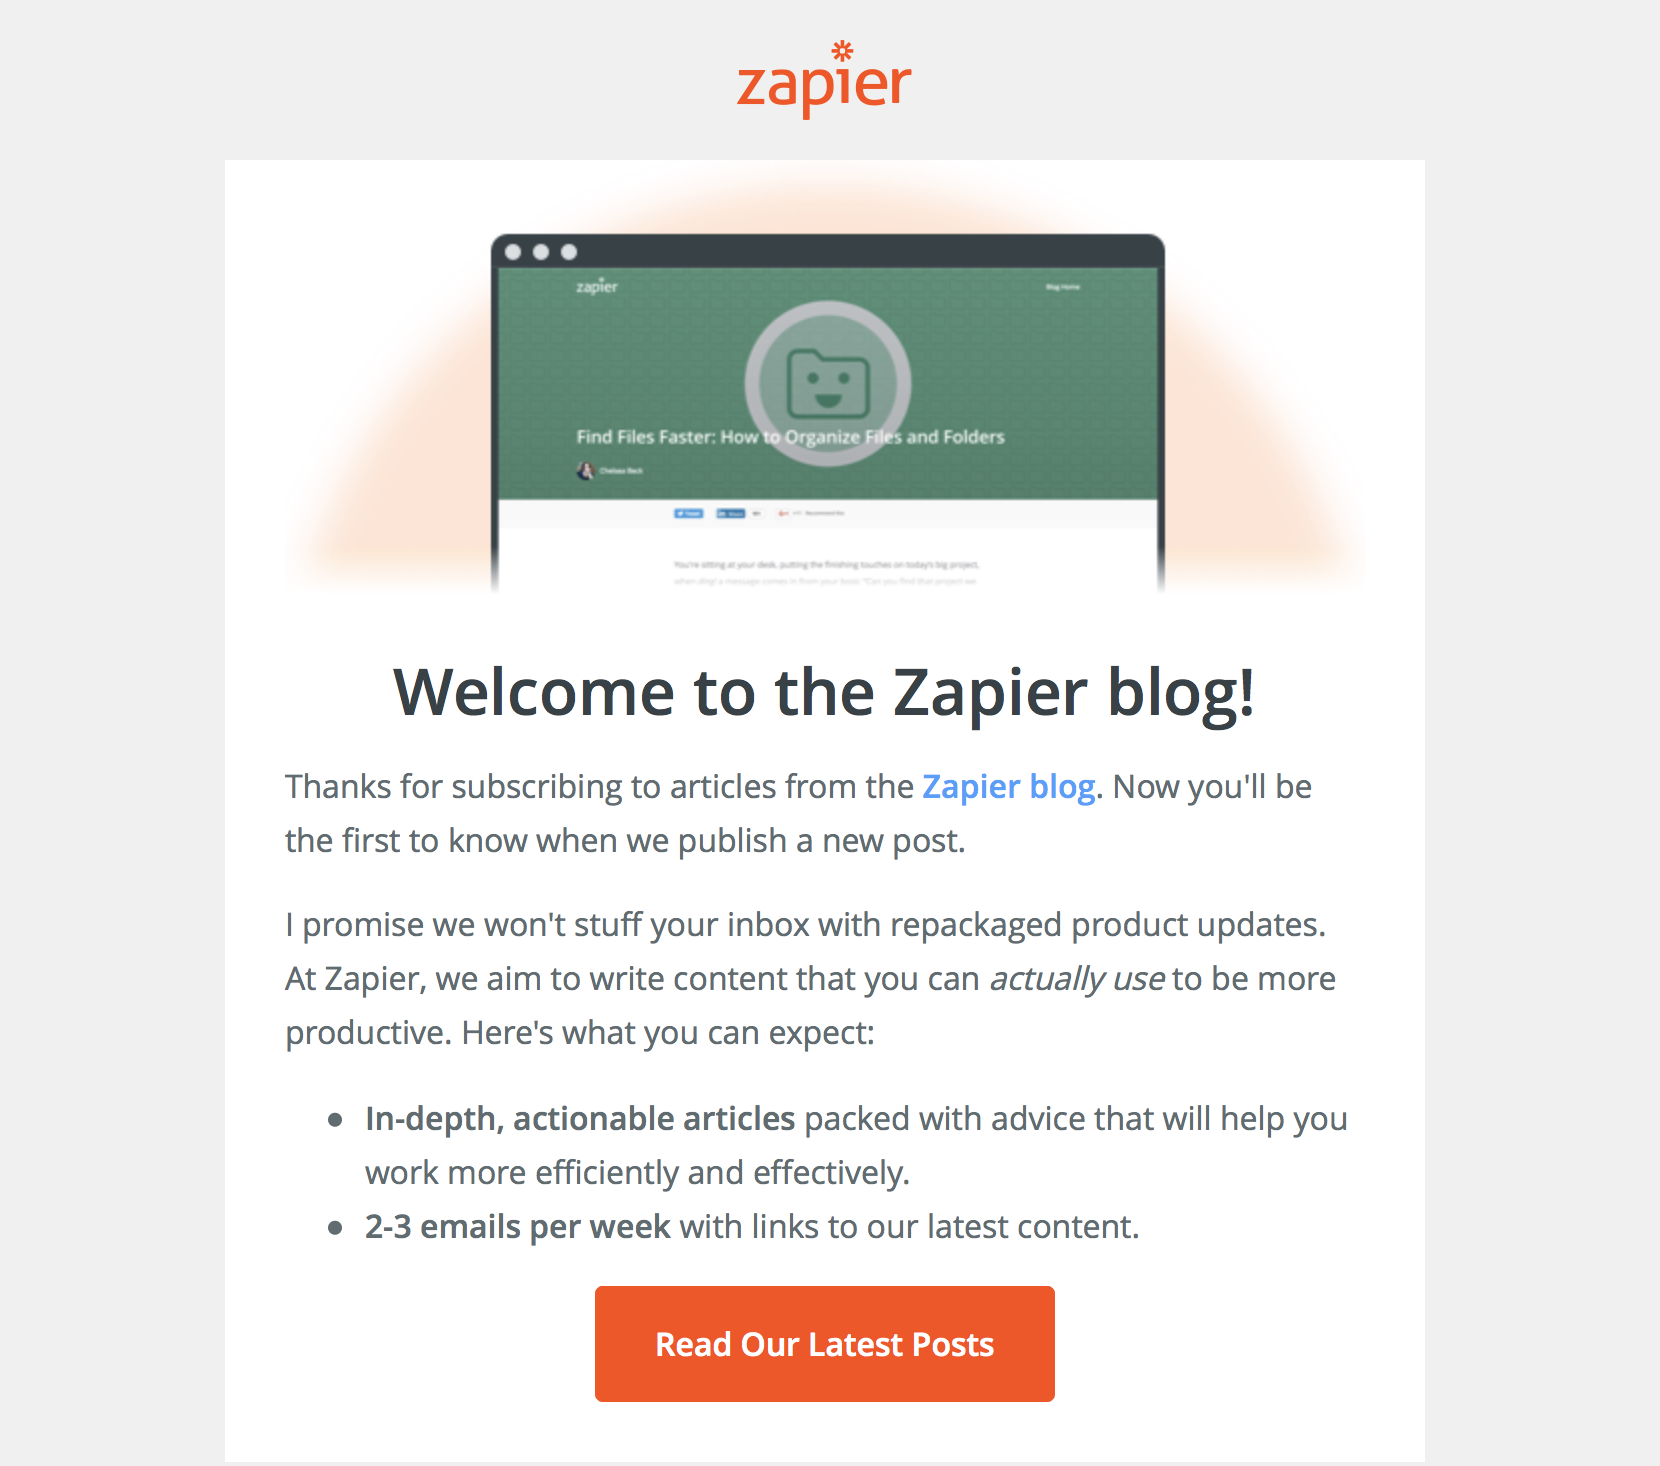 Zapier Blog Welcome Email